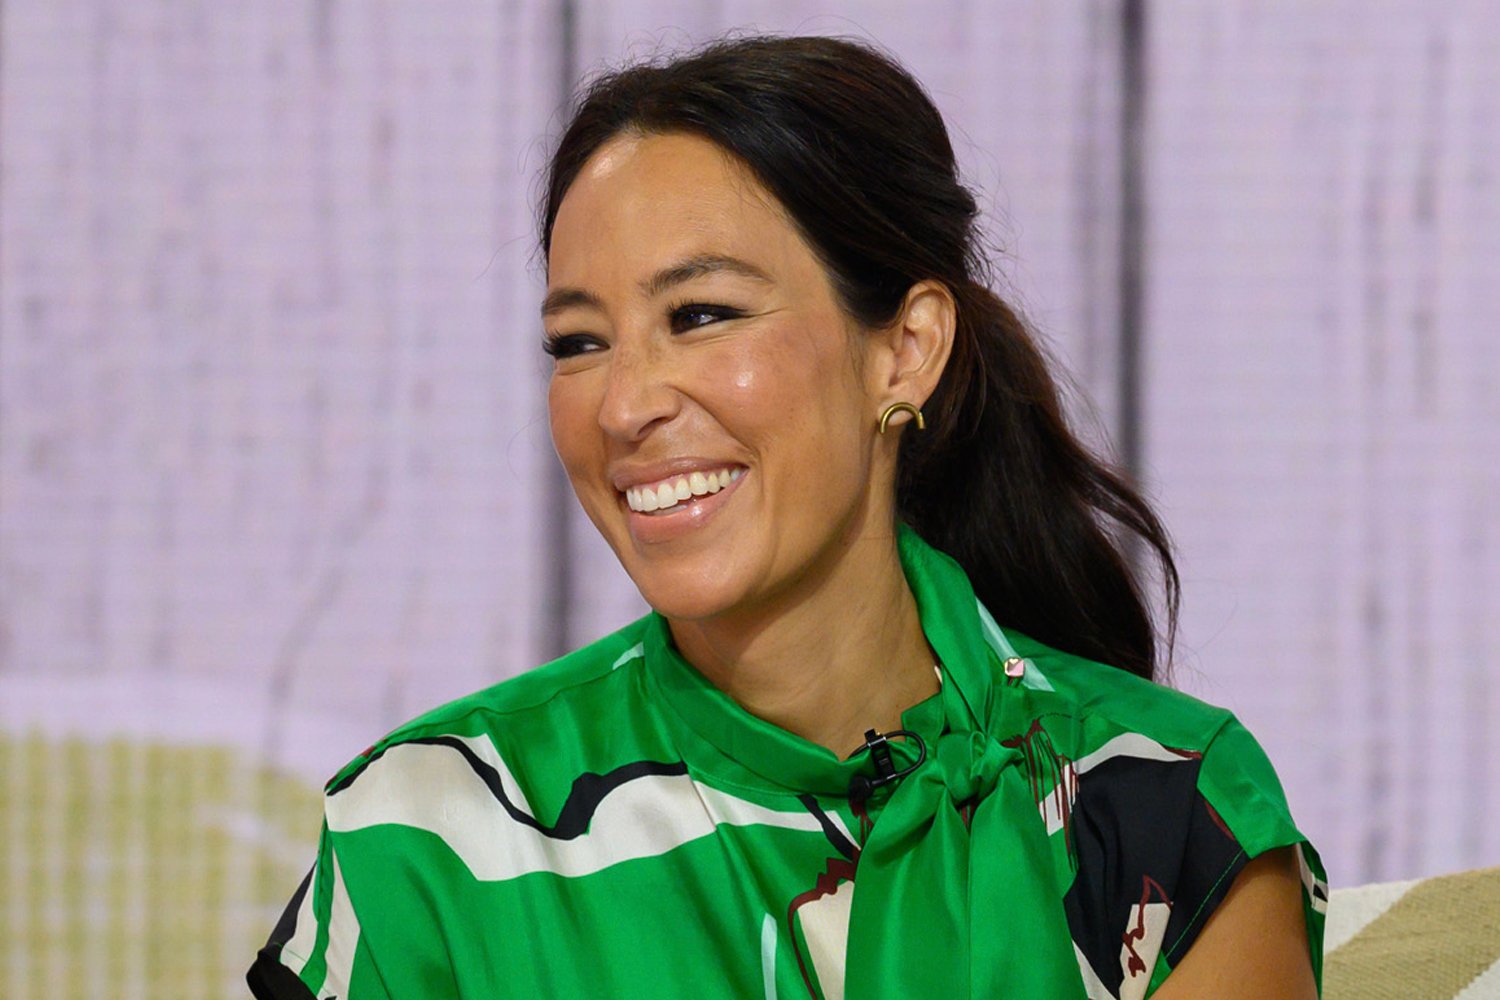 Joanna Gaines Shares Throwback Photo to Celebrate Opening of Magnolia ...